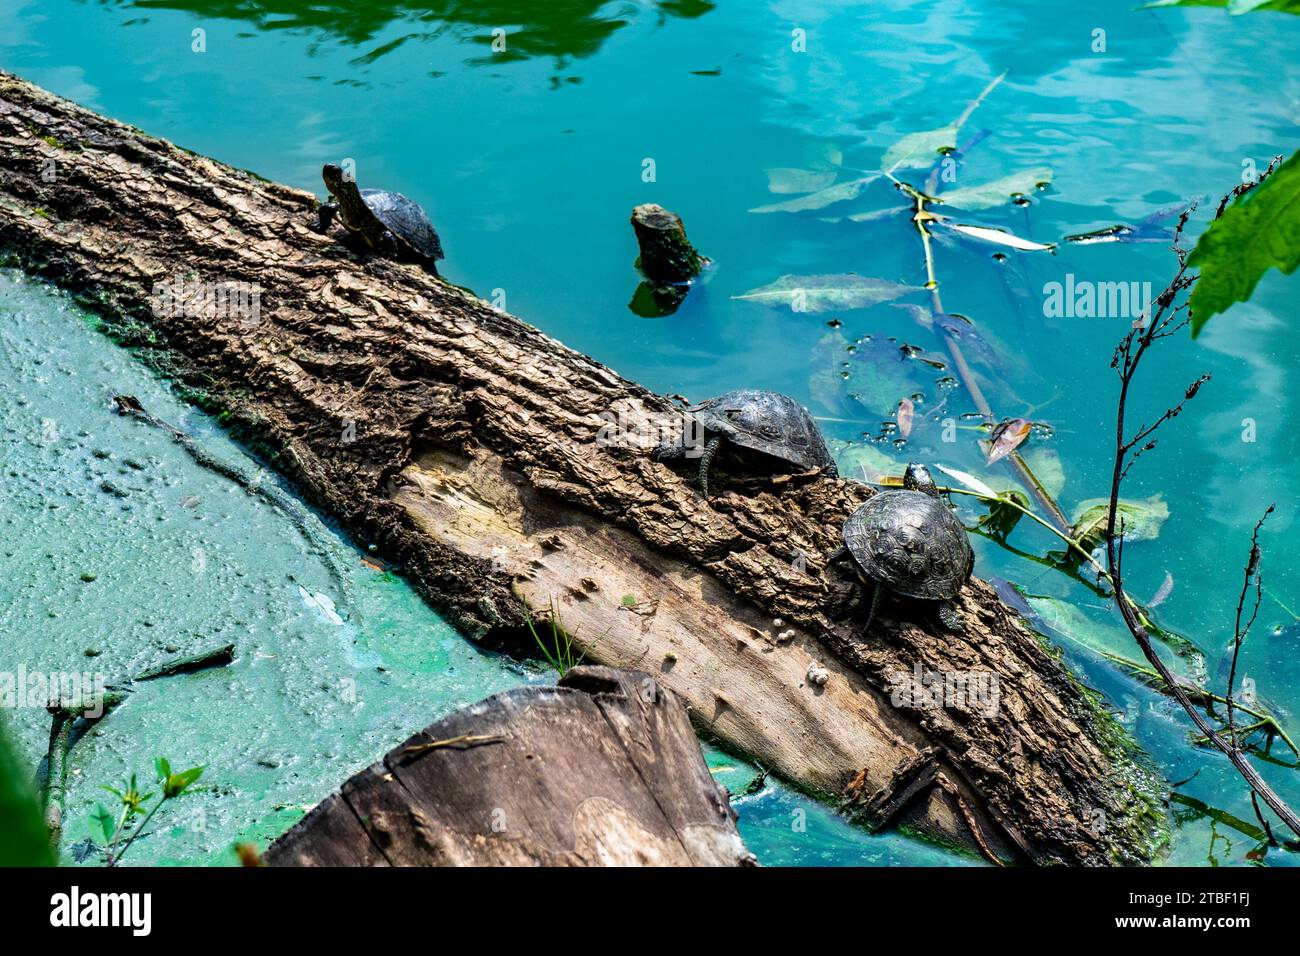 Turtles climb the trunk of a tree that has fallen into the lake. Stock Photo